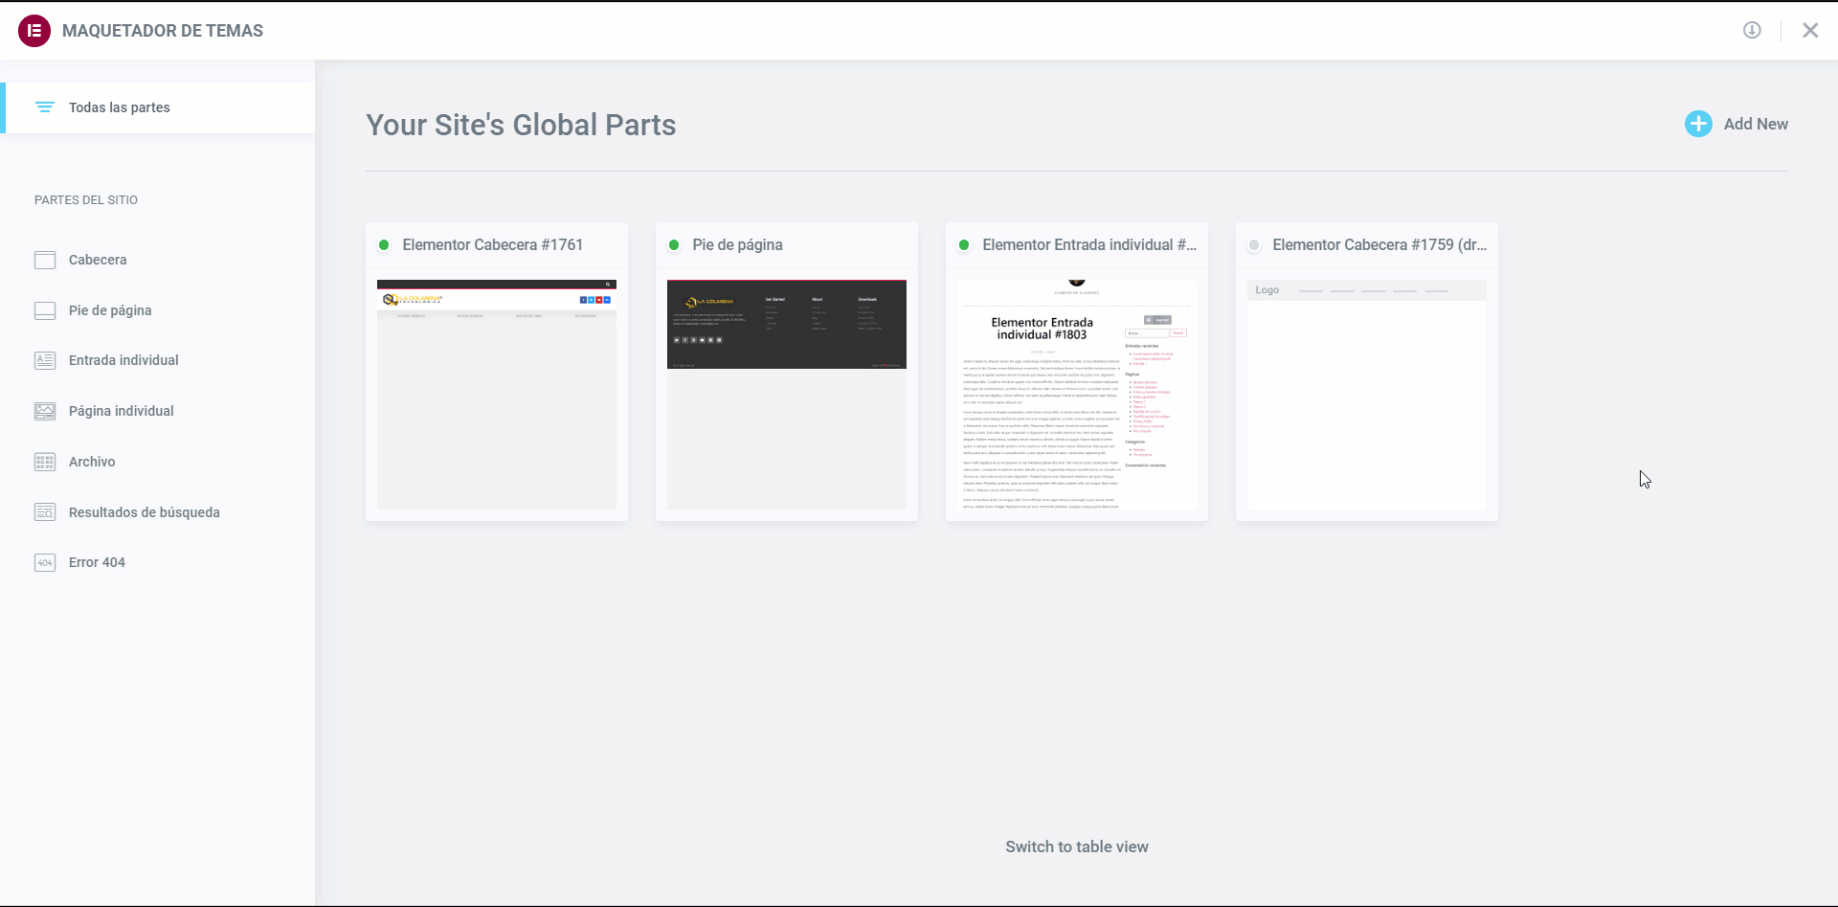 Adding new part with the Theme Layout Maker